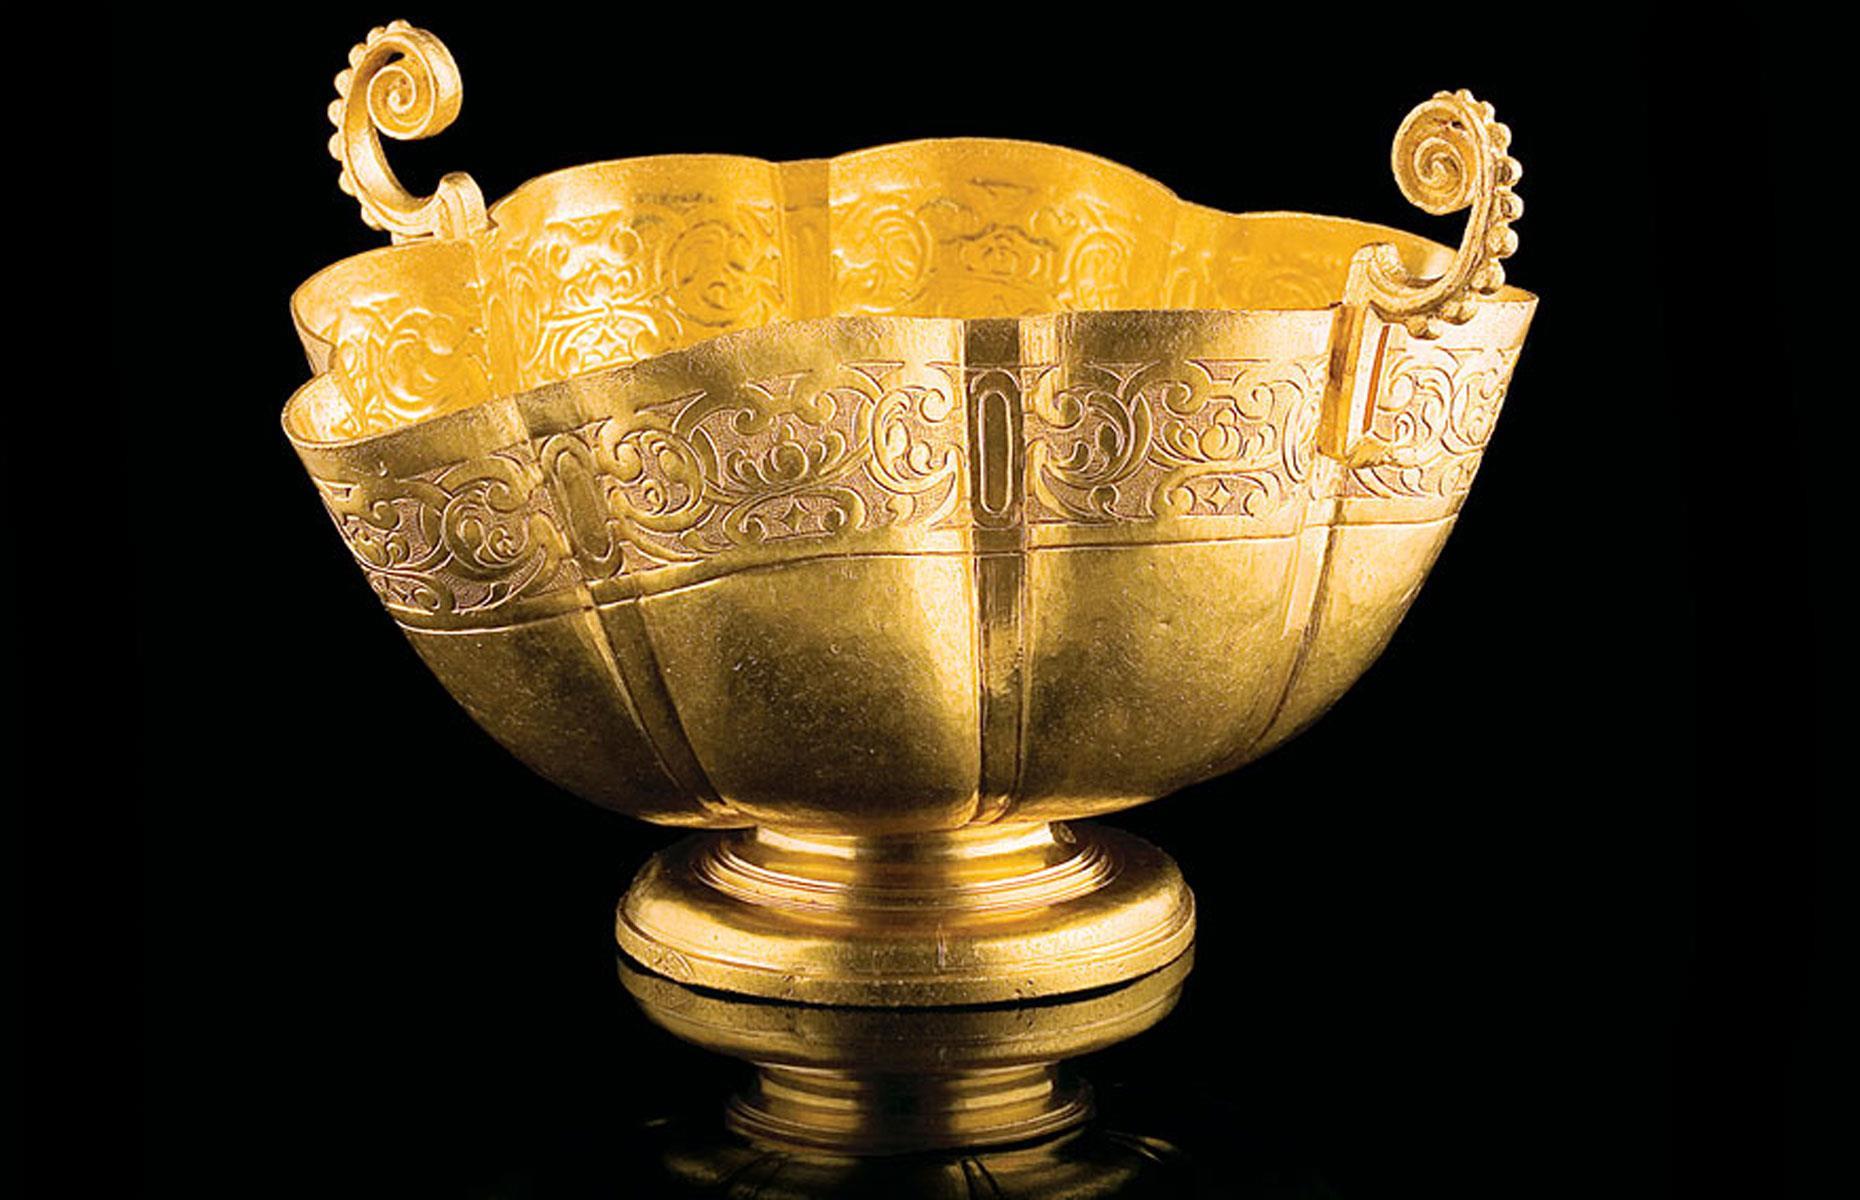 Gold chalice from a lost Spanish galleon, USA: $413,000 (£310k)